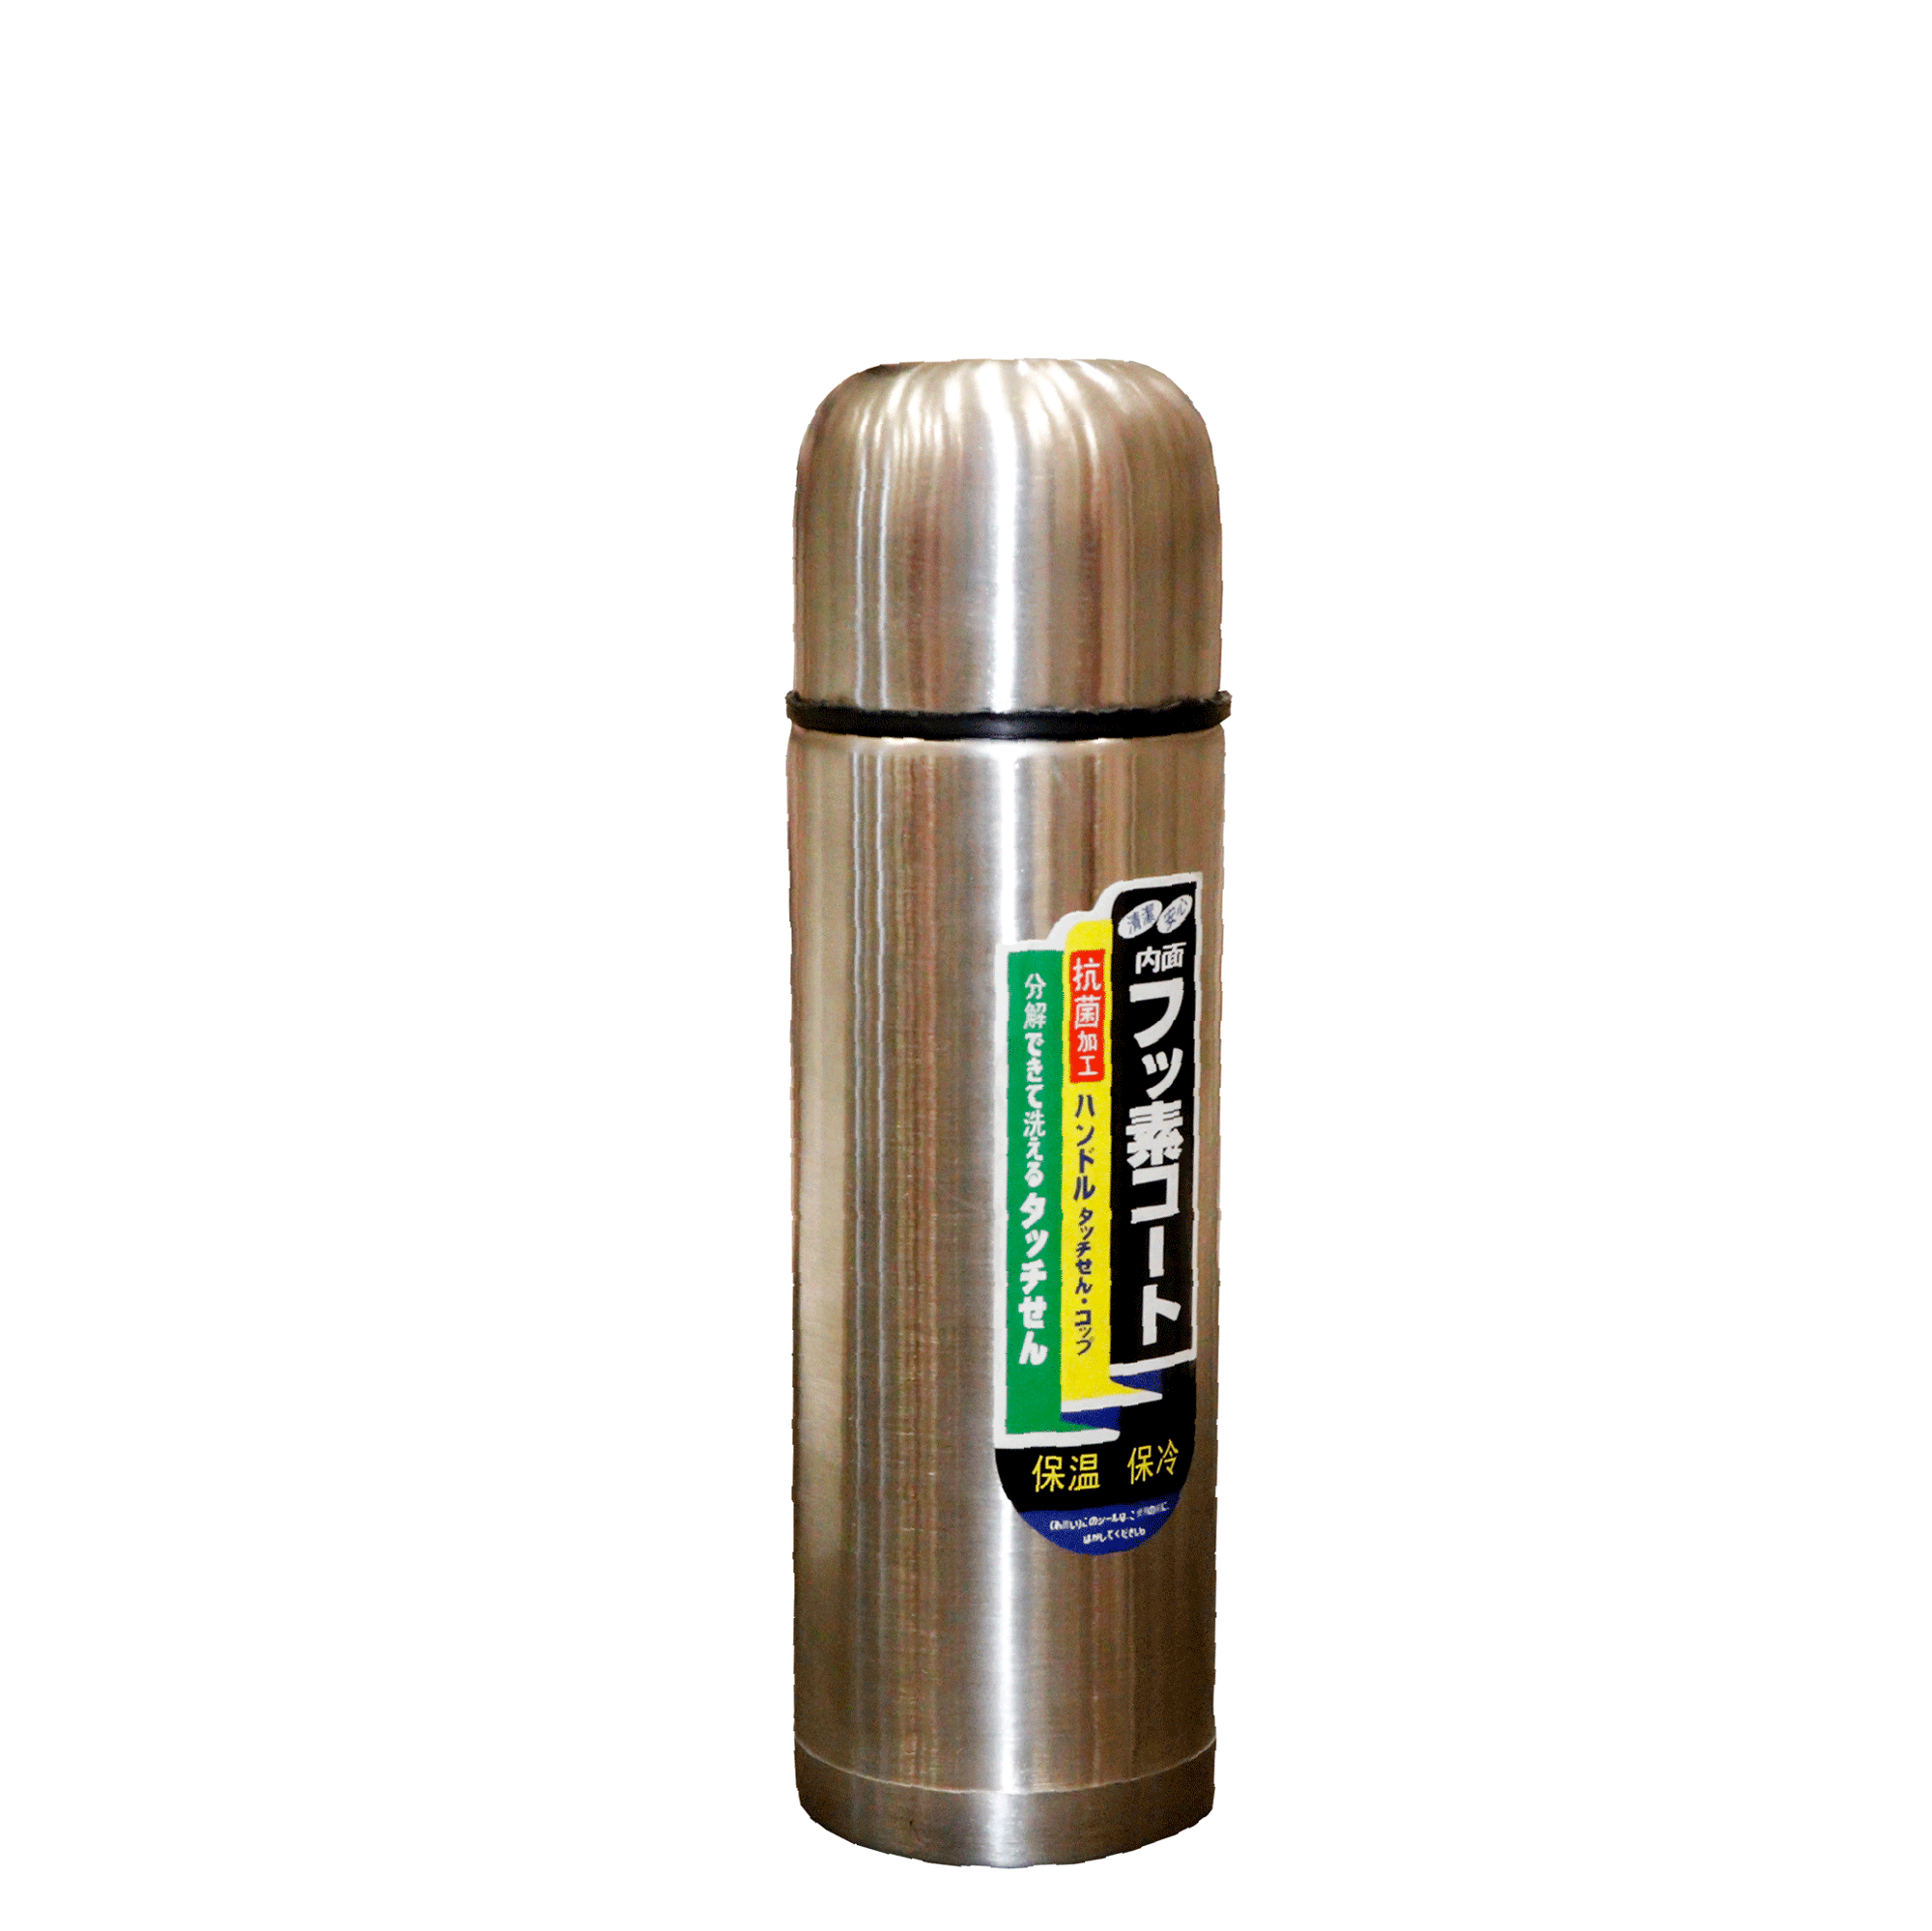 Thermos bottle 20-2/8-2/18-6